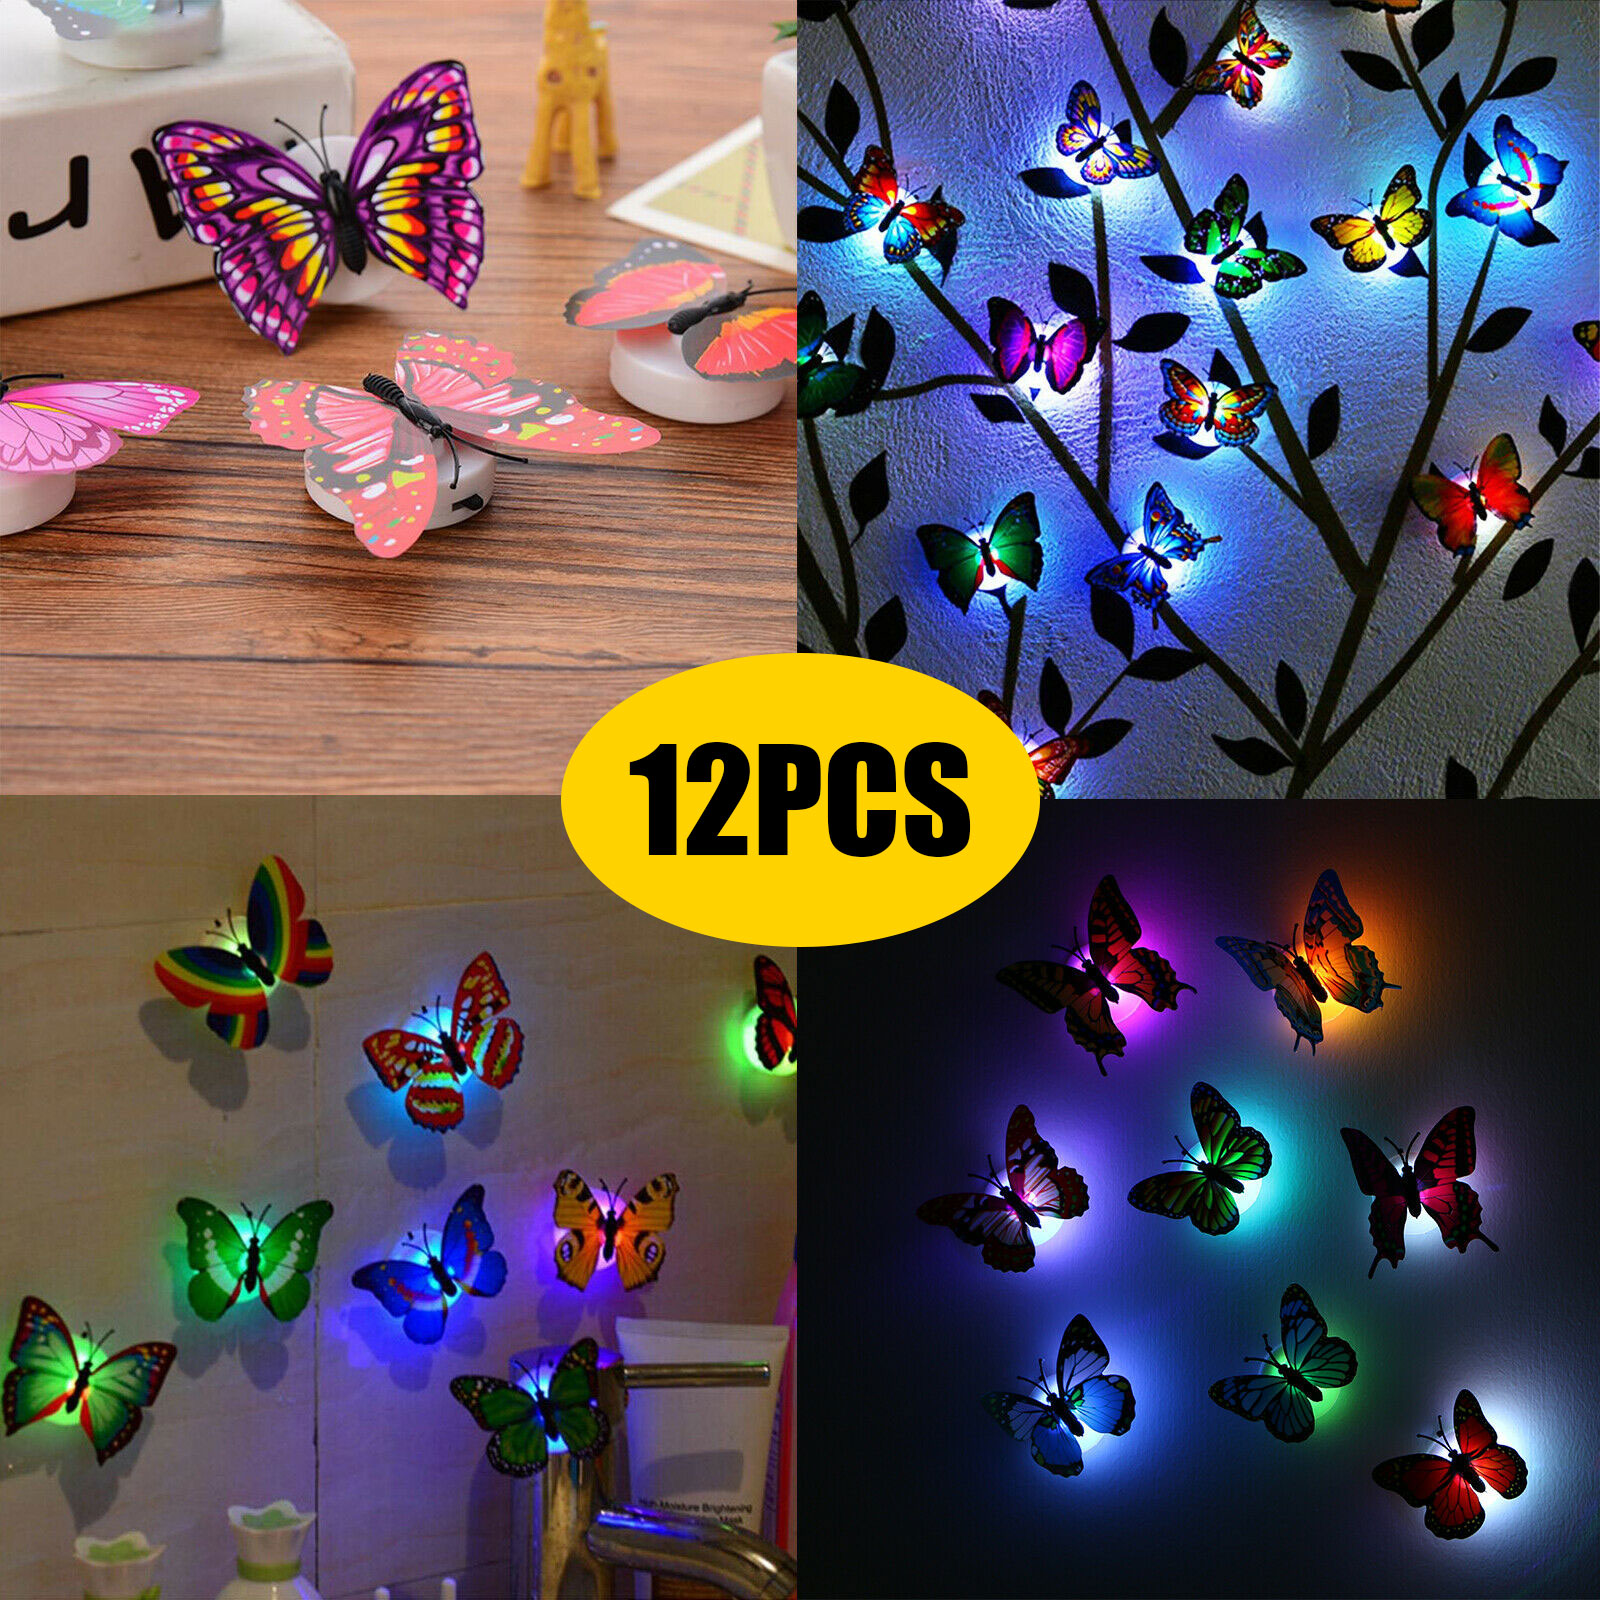 Details about   3D Butterfly LED Colorful Night Light Art Design Wall Sticker Home Mural Decor,